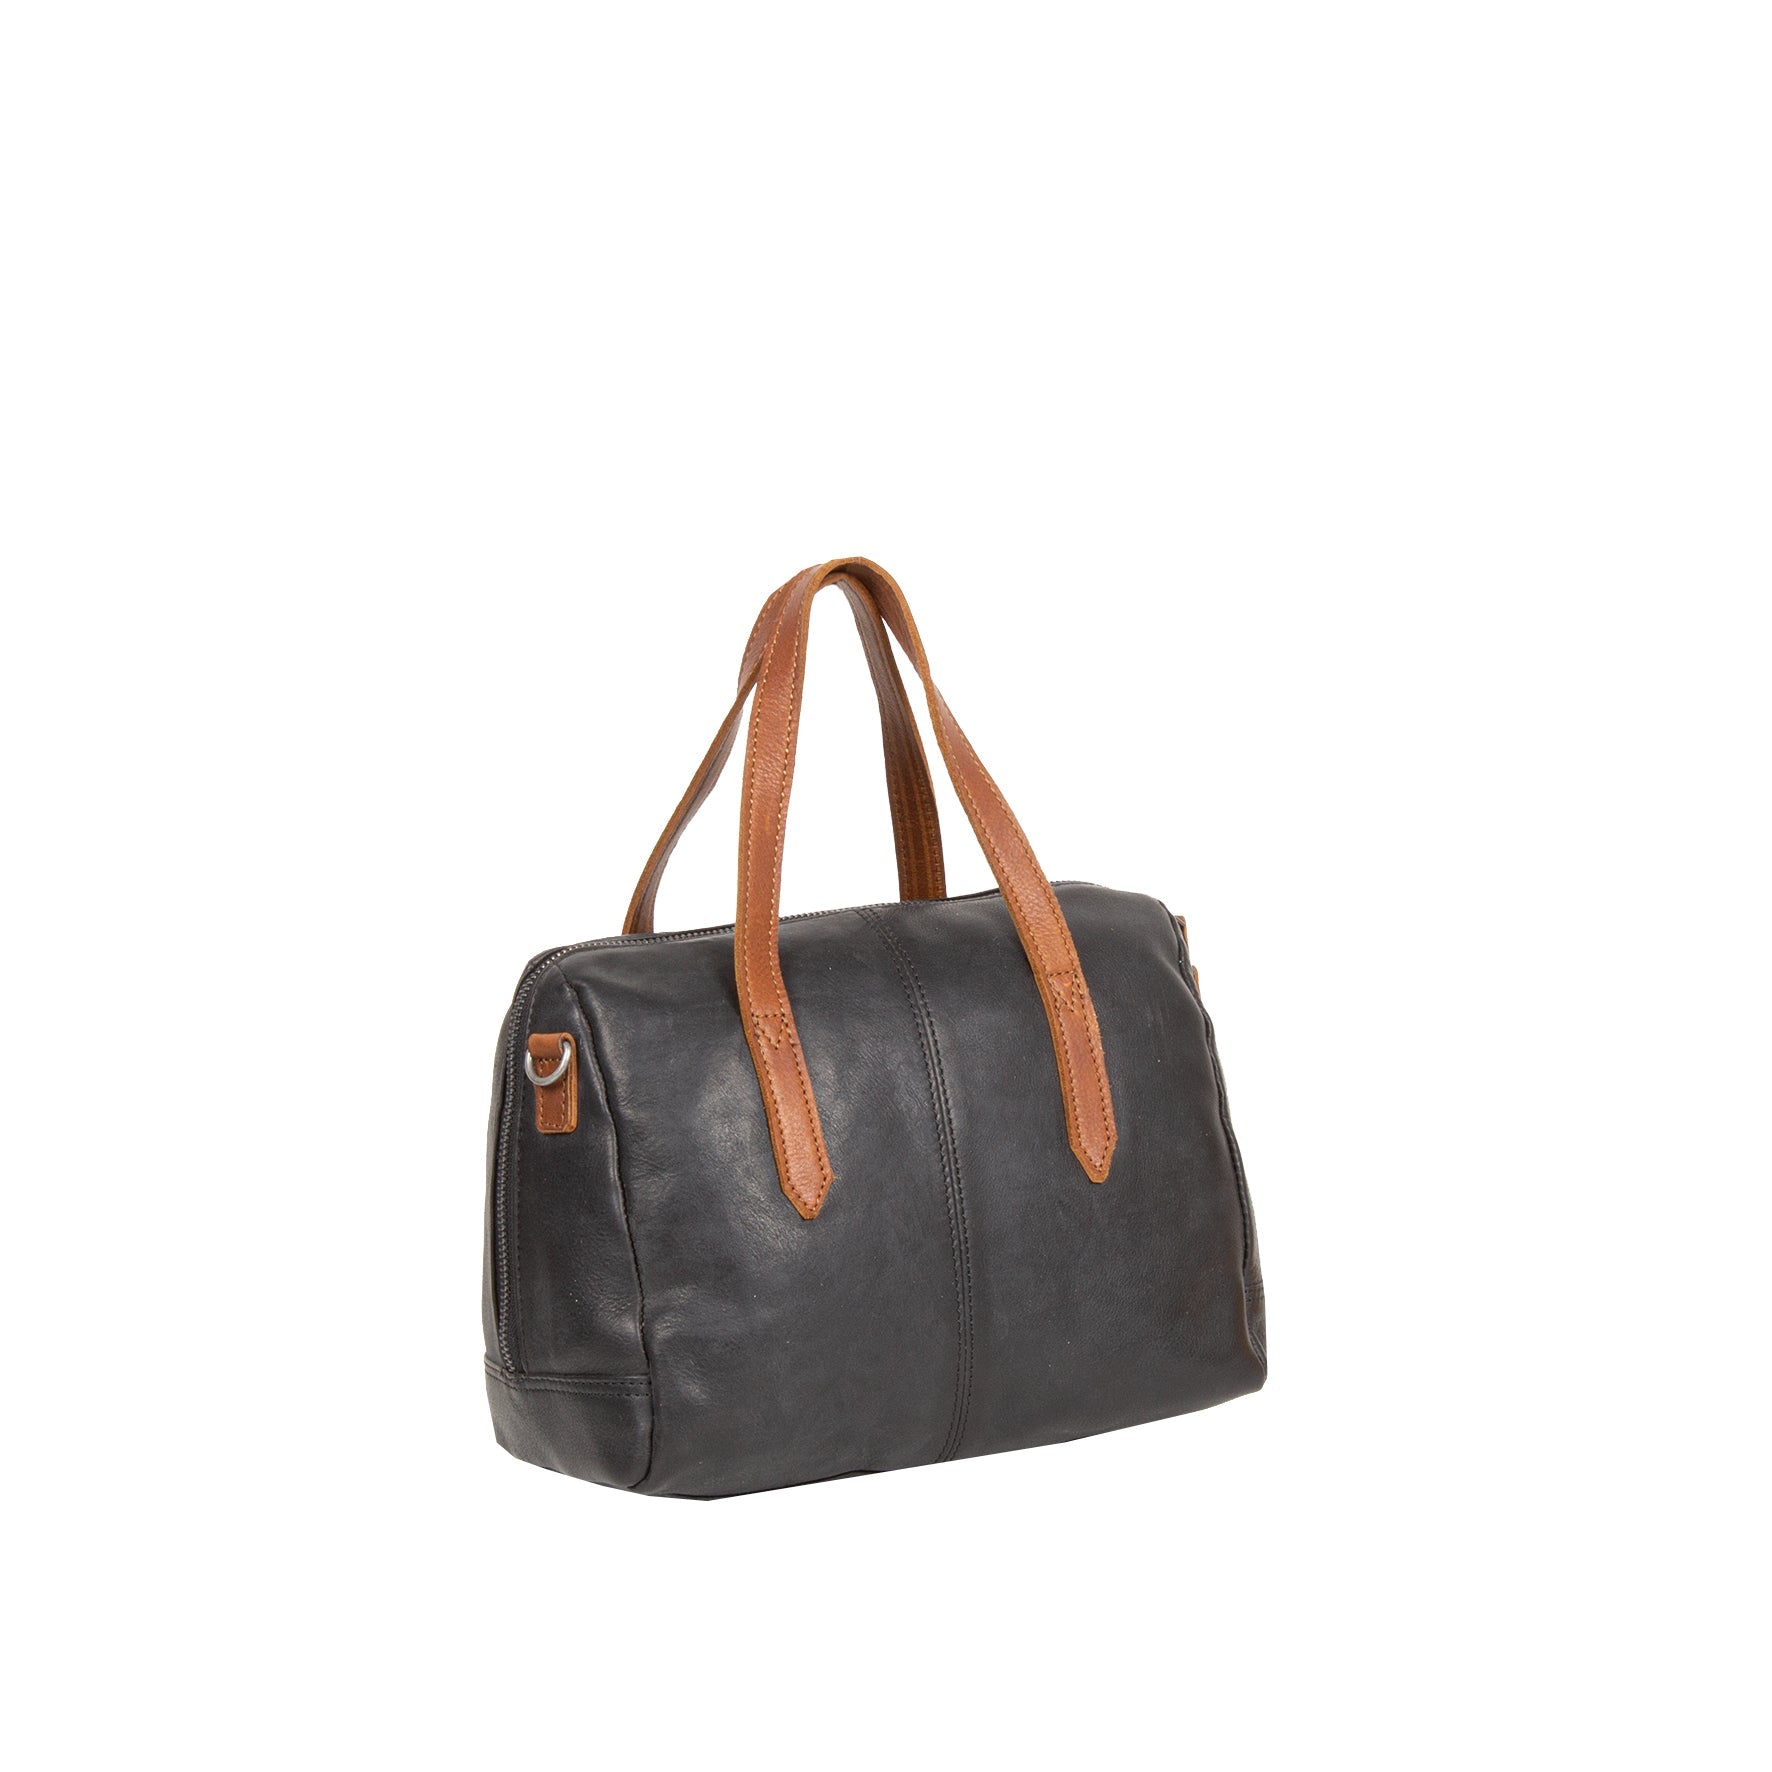 "Dyon" 12.1344 Bowlingbag round zip 2 tone 26x12x20cm von Justified - Laure Bags and Travel